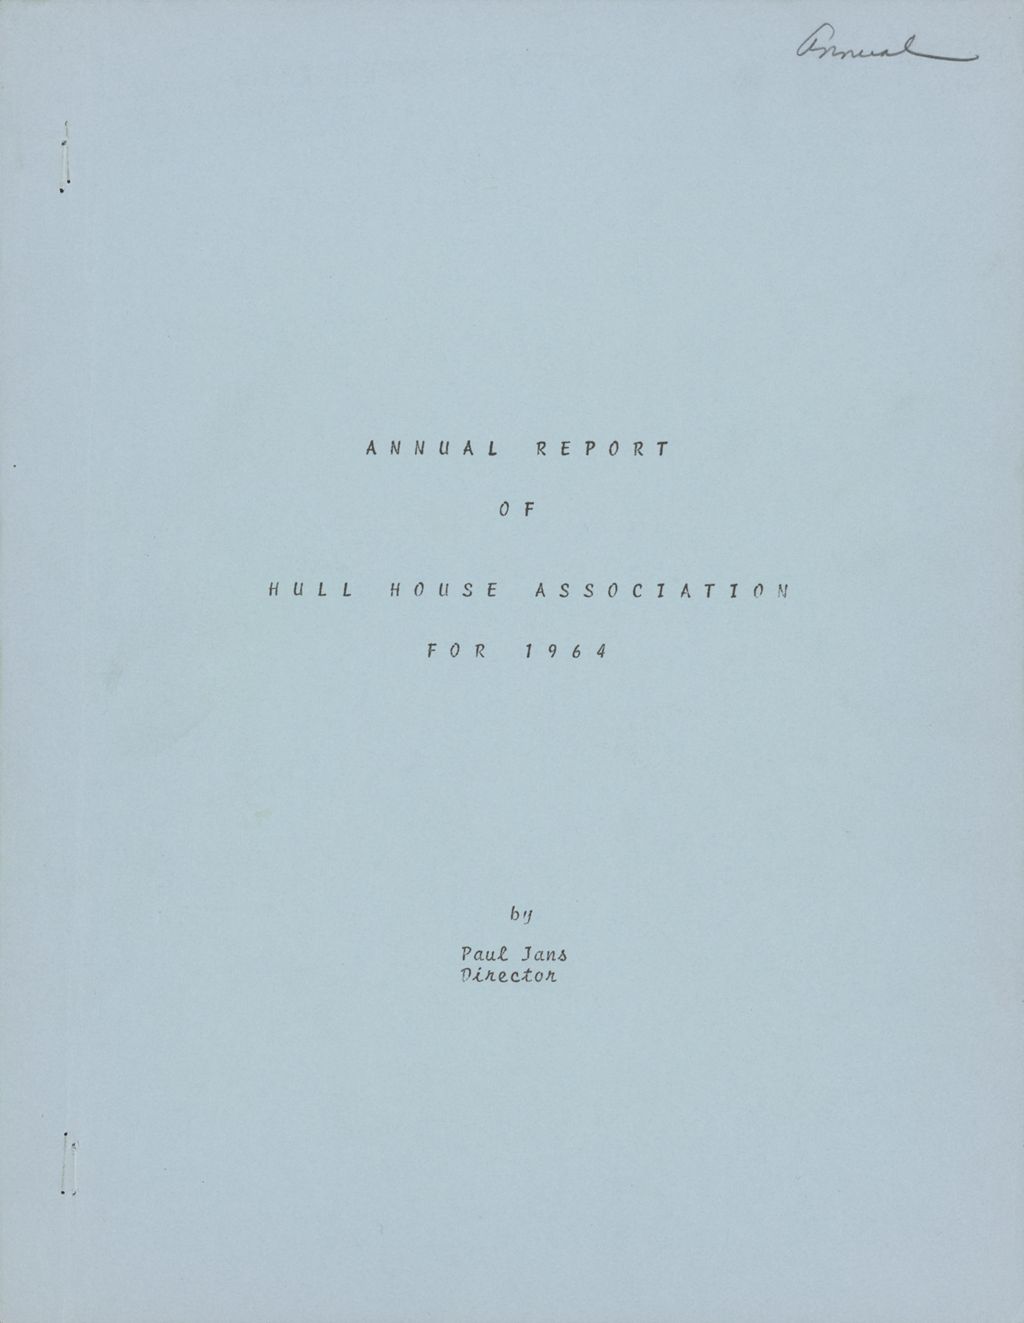 Miniature of Hull House Association, Annual Report, 1964